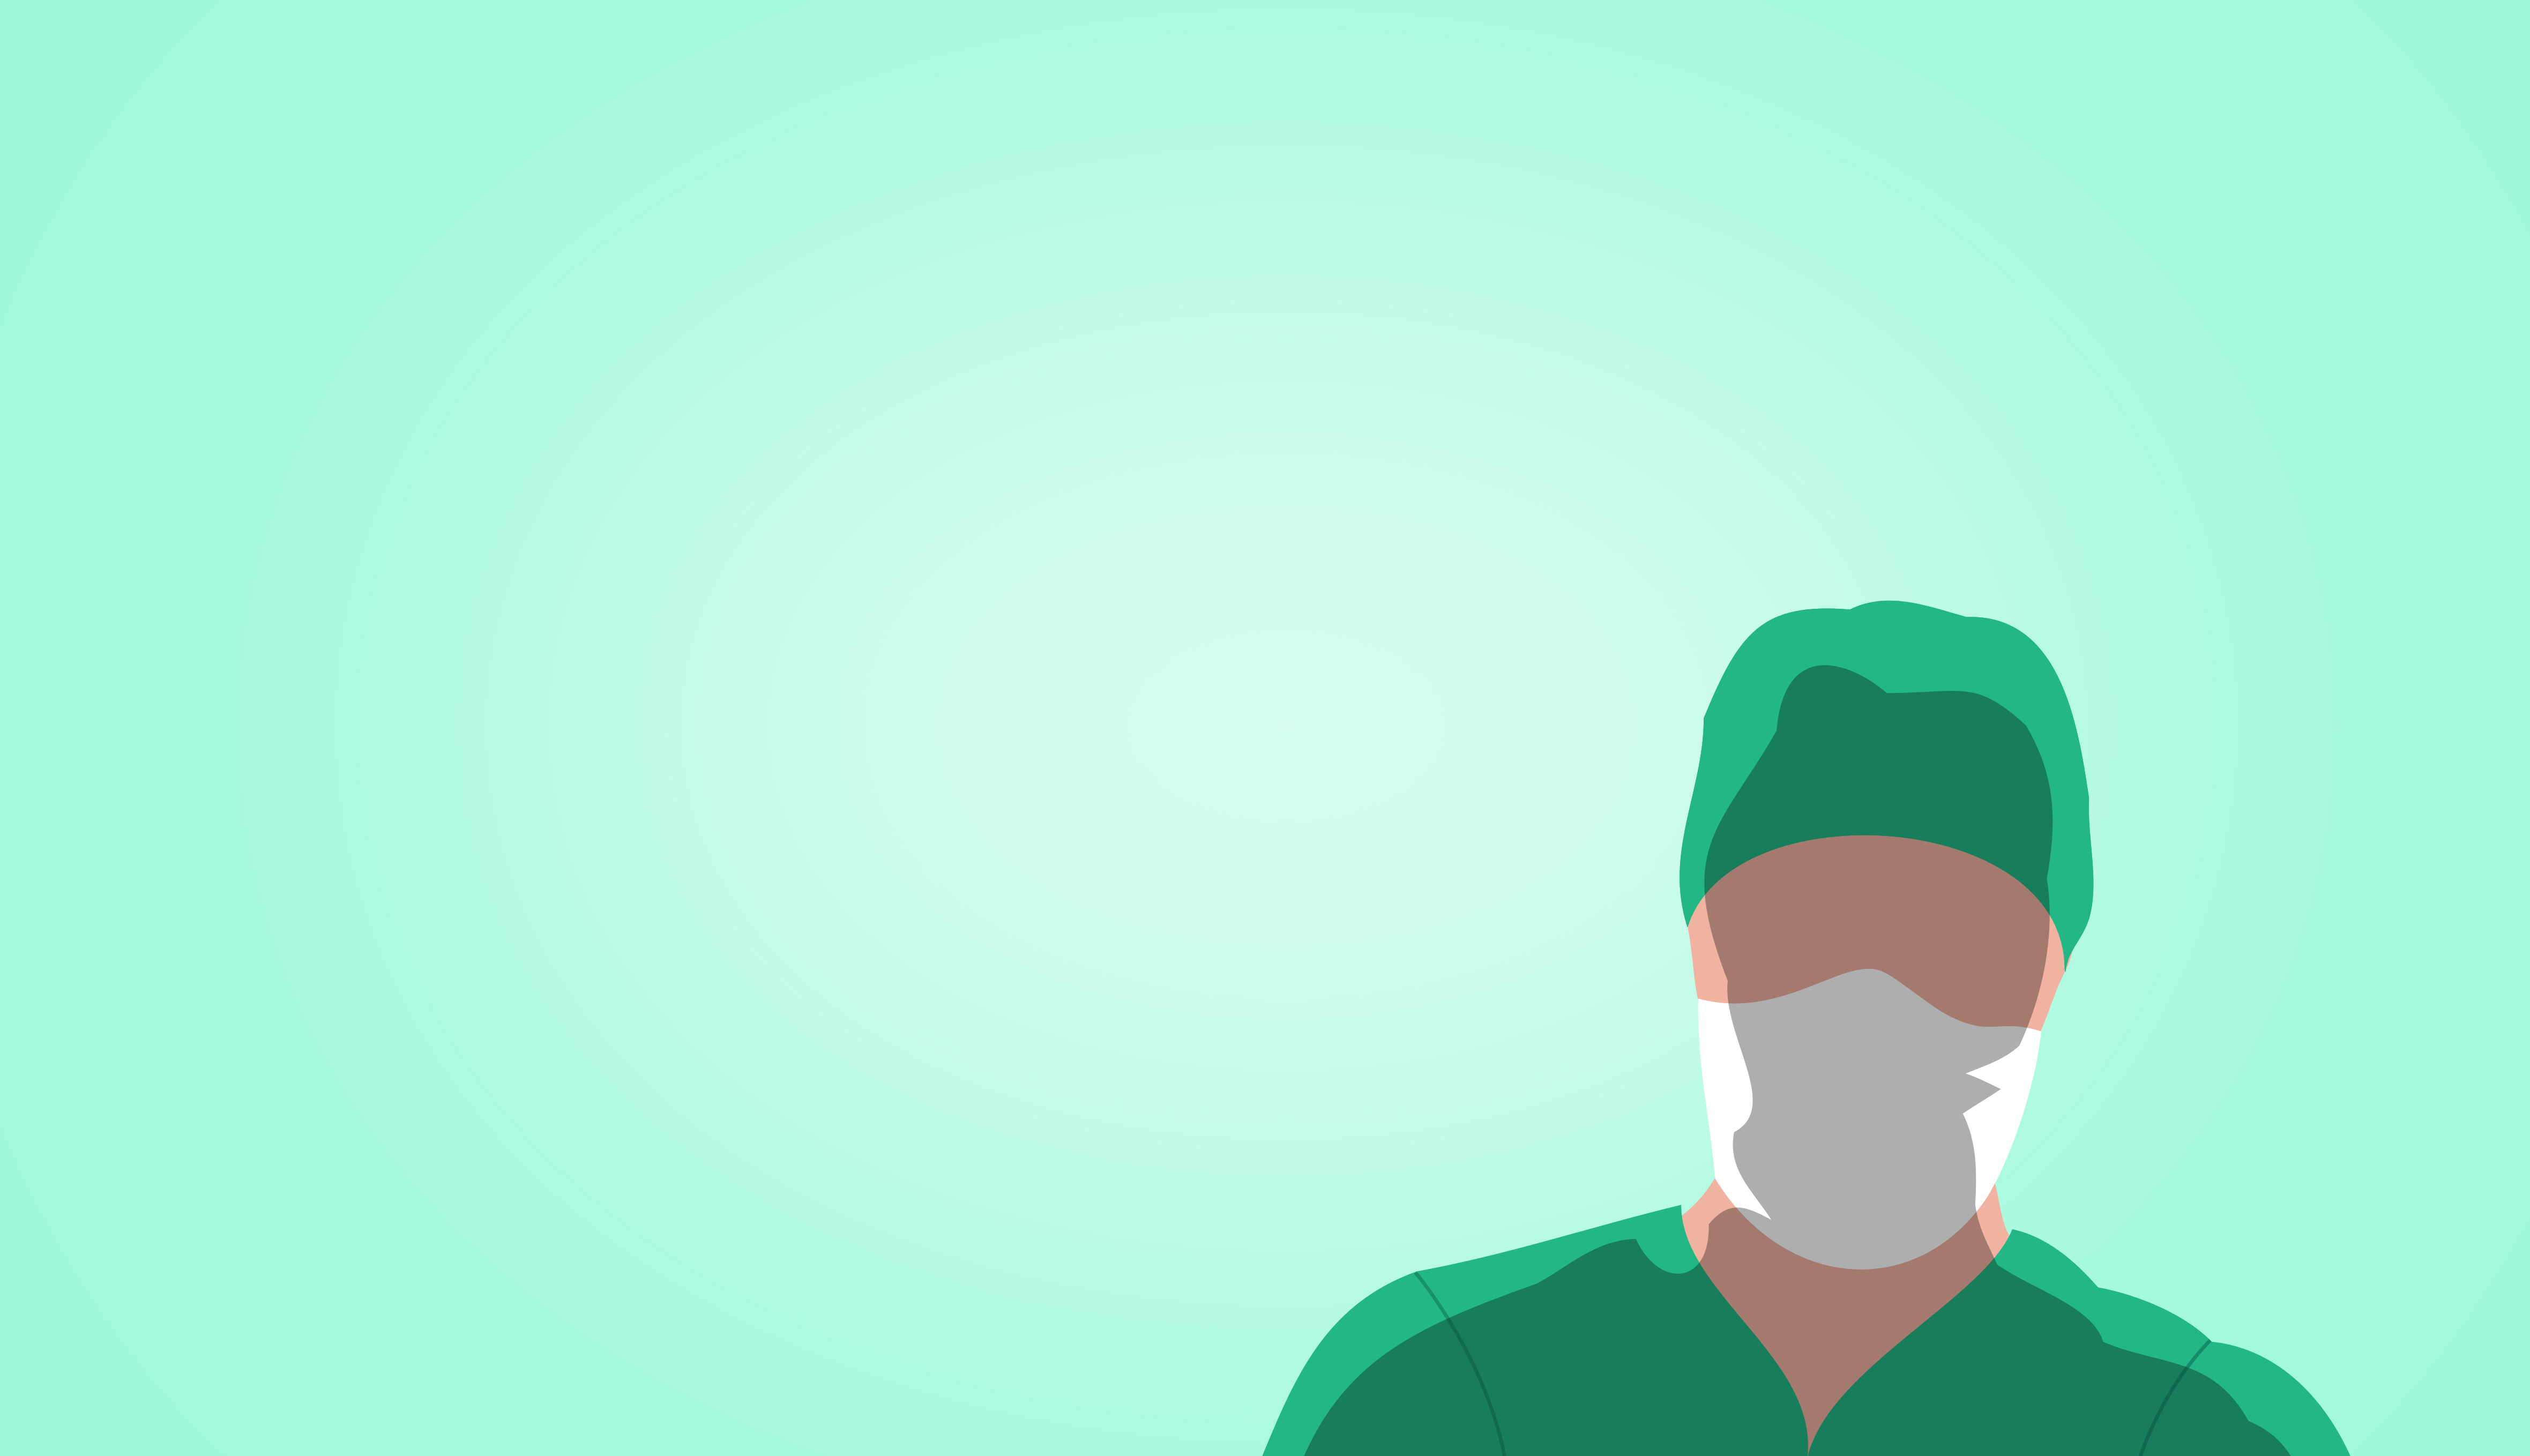 Surgeon silhouette - image with copyspace photo